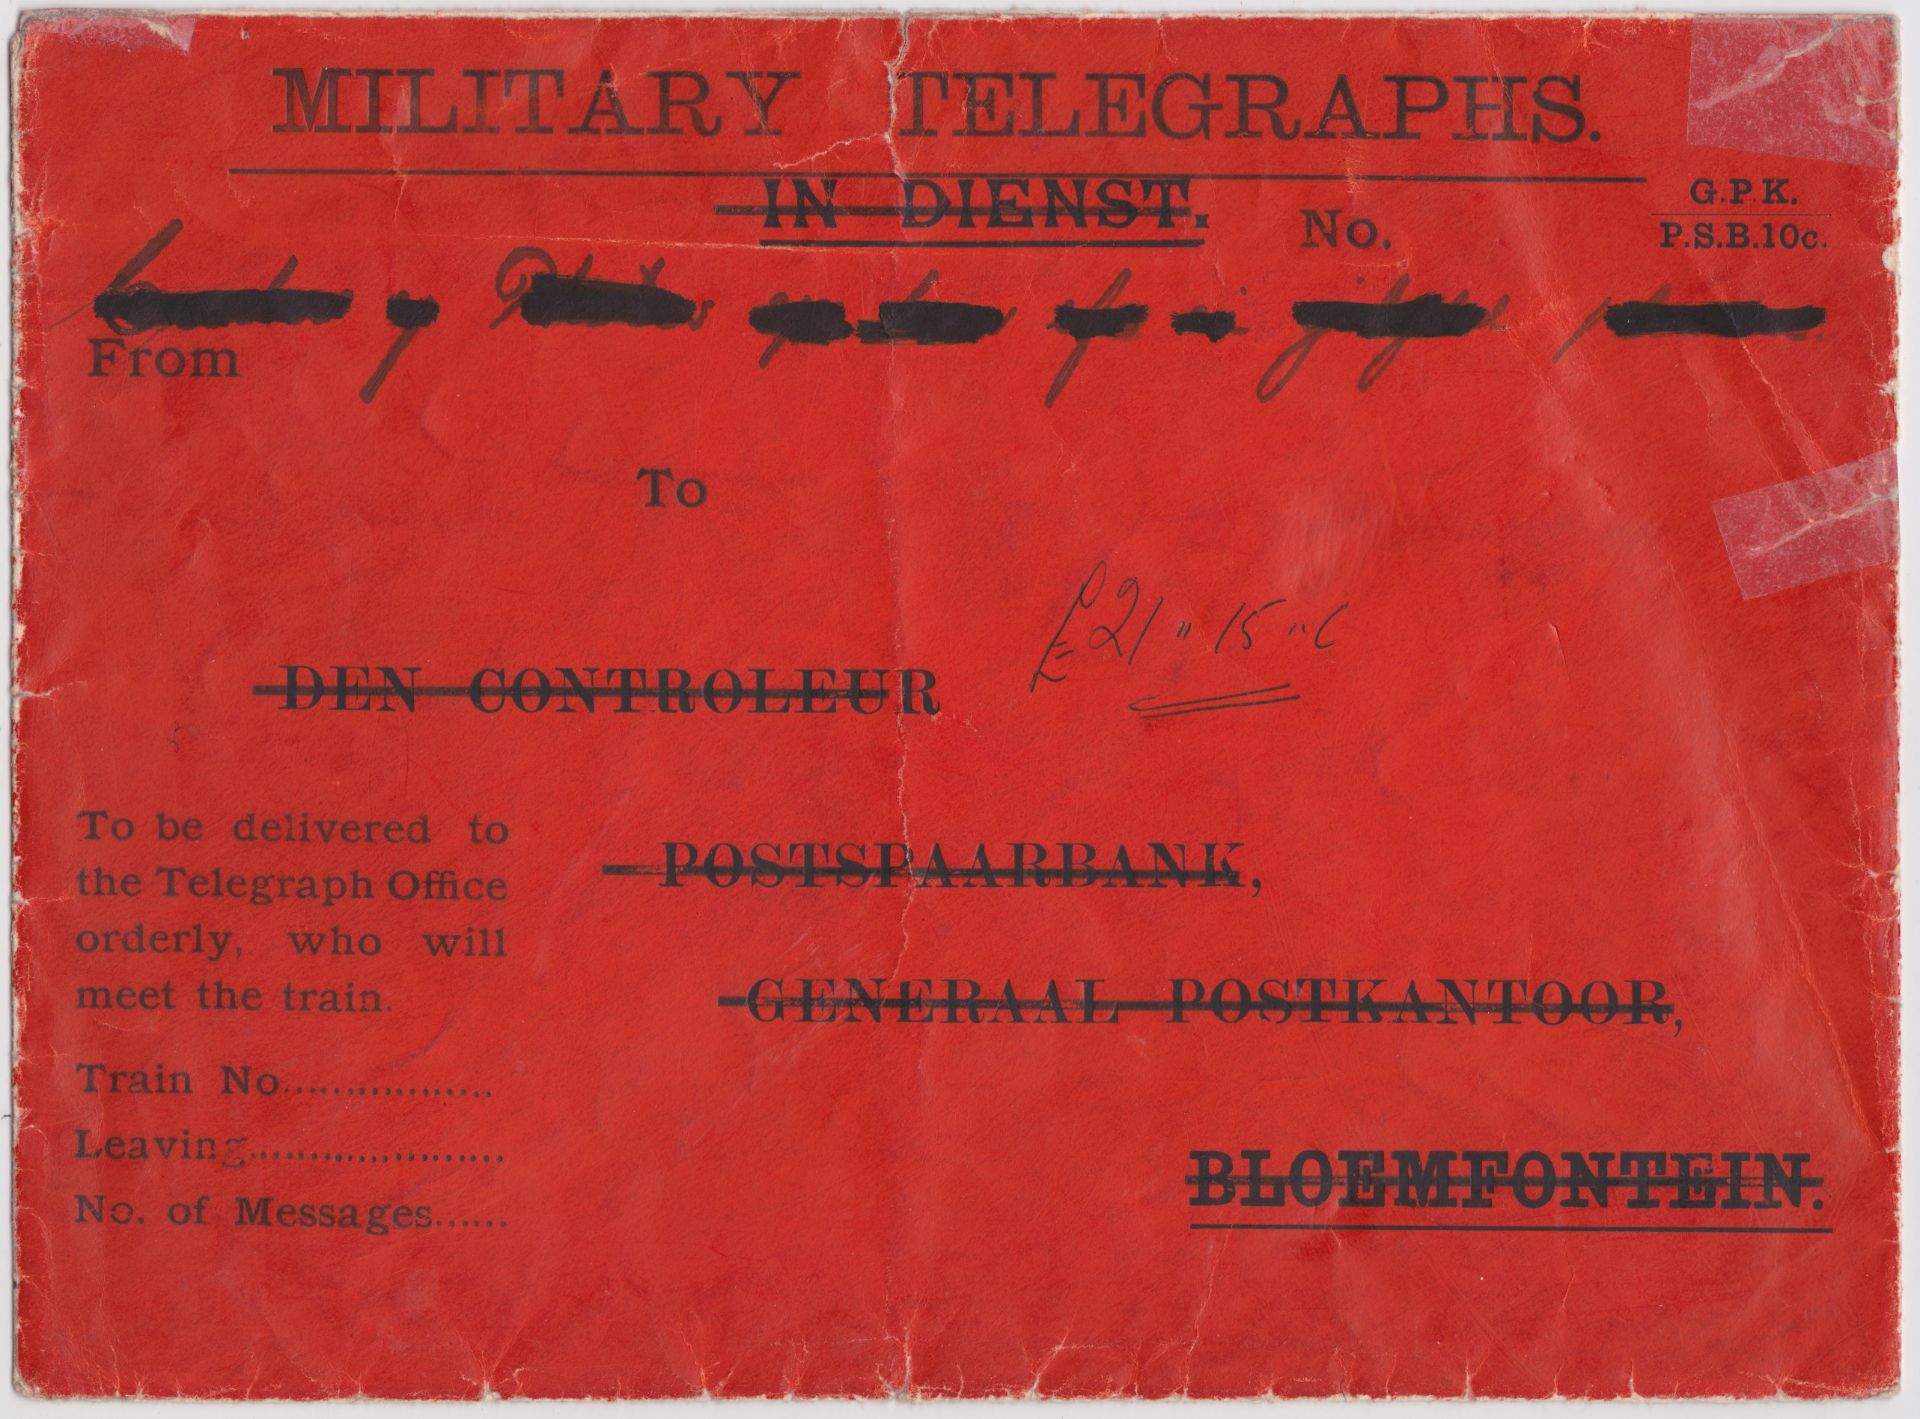 BOER WAR c.1900 - Red O.F.S. Savings Bank envelope (minor faults) overprinted with "MILITARY